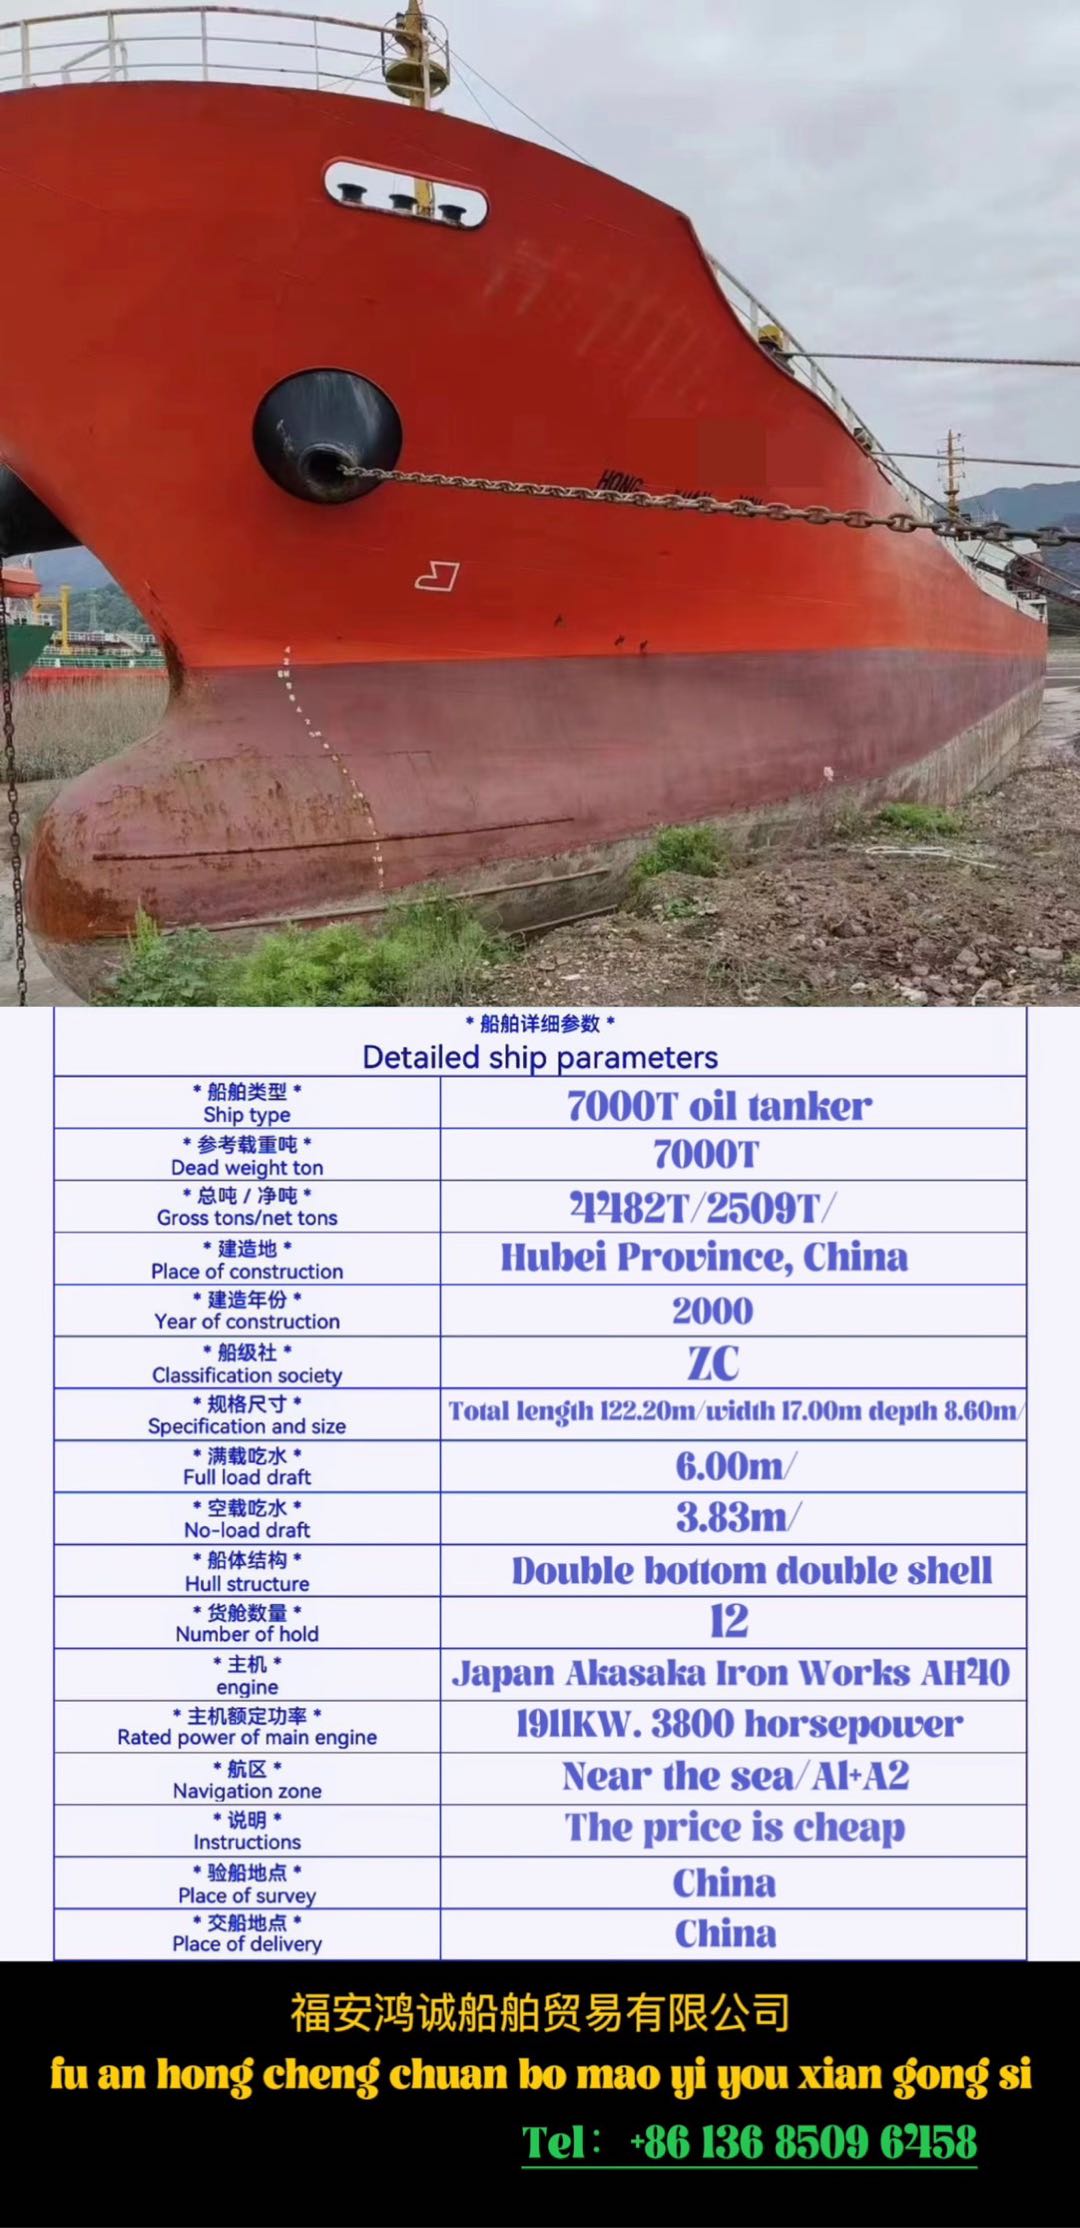 For sale: 7000T double-bottom double-shell tanker, built in China in 2000.